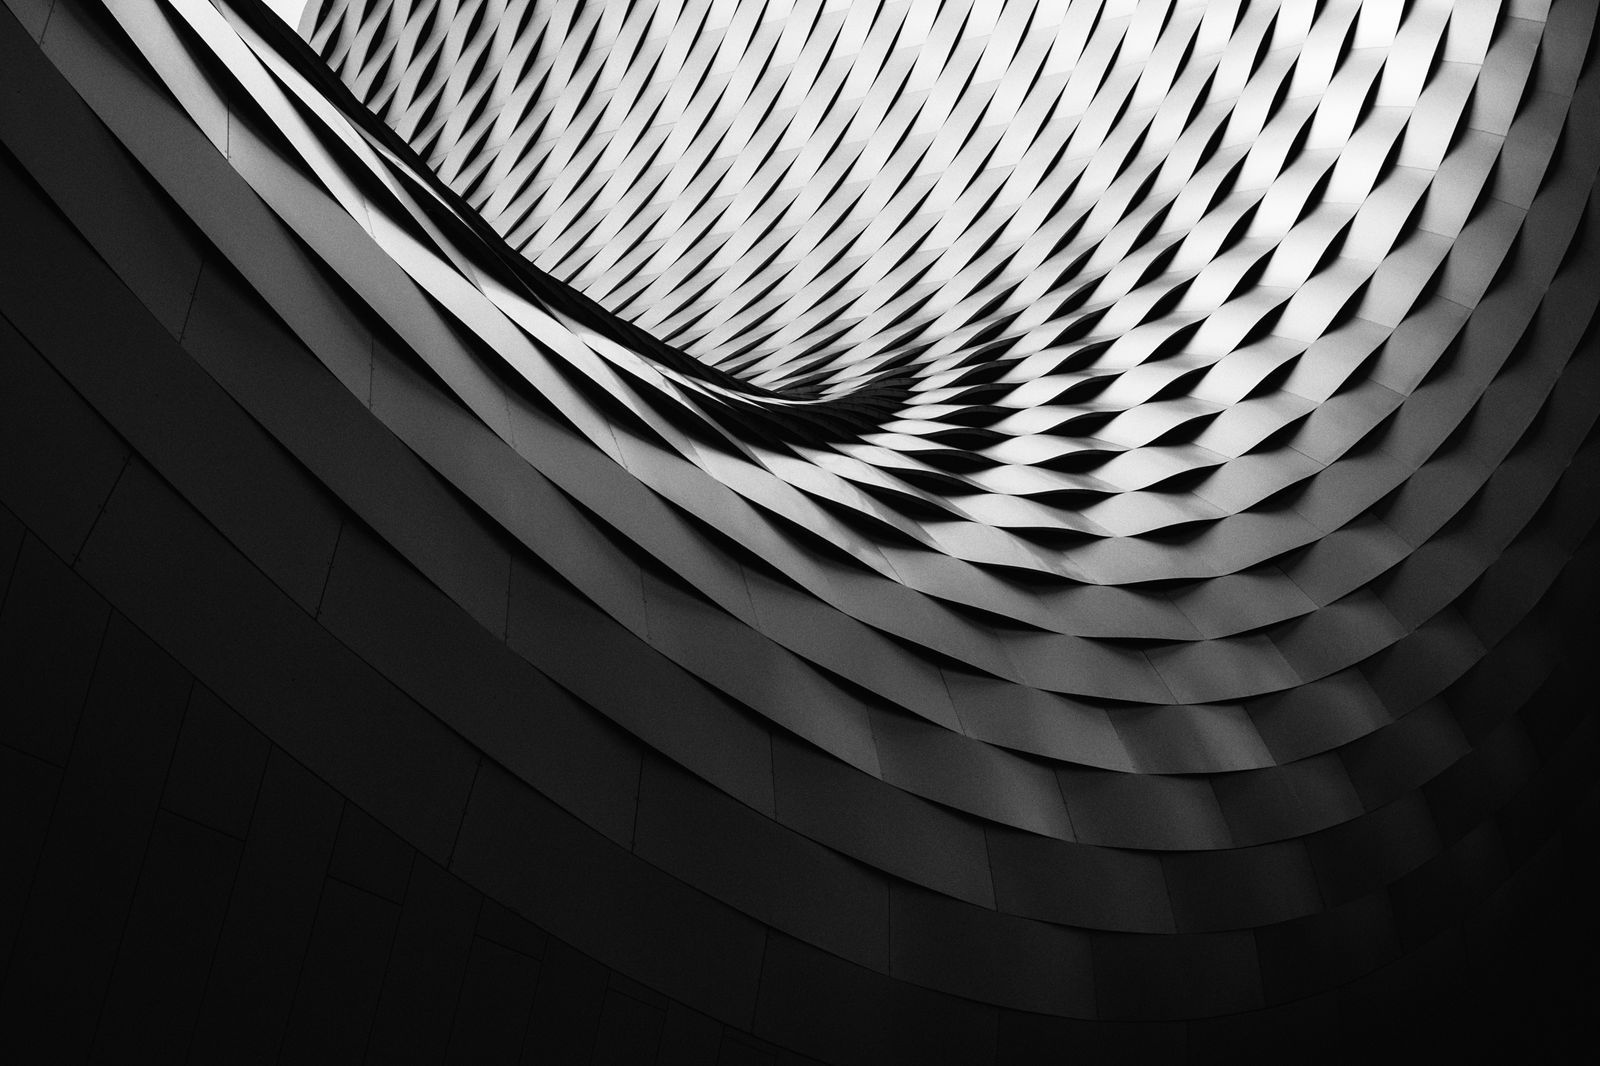 Black and White photos from The Unsplash Awards image 2